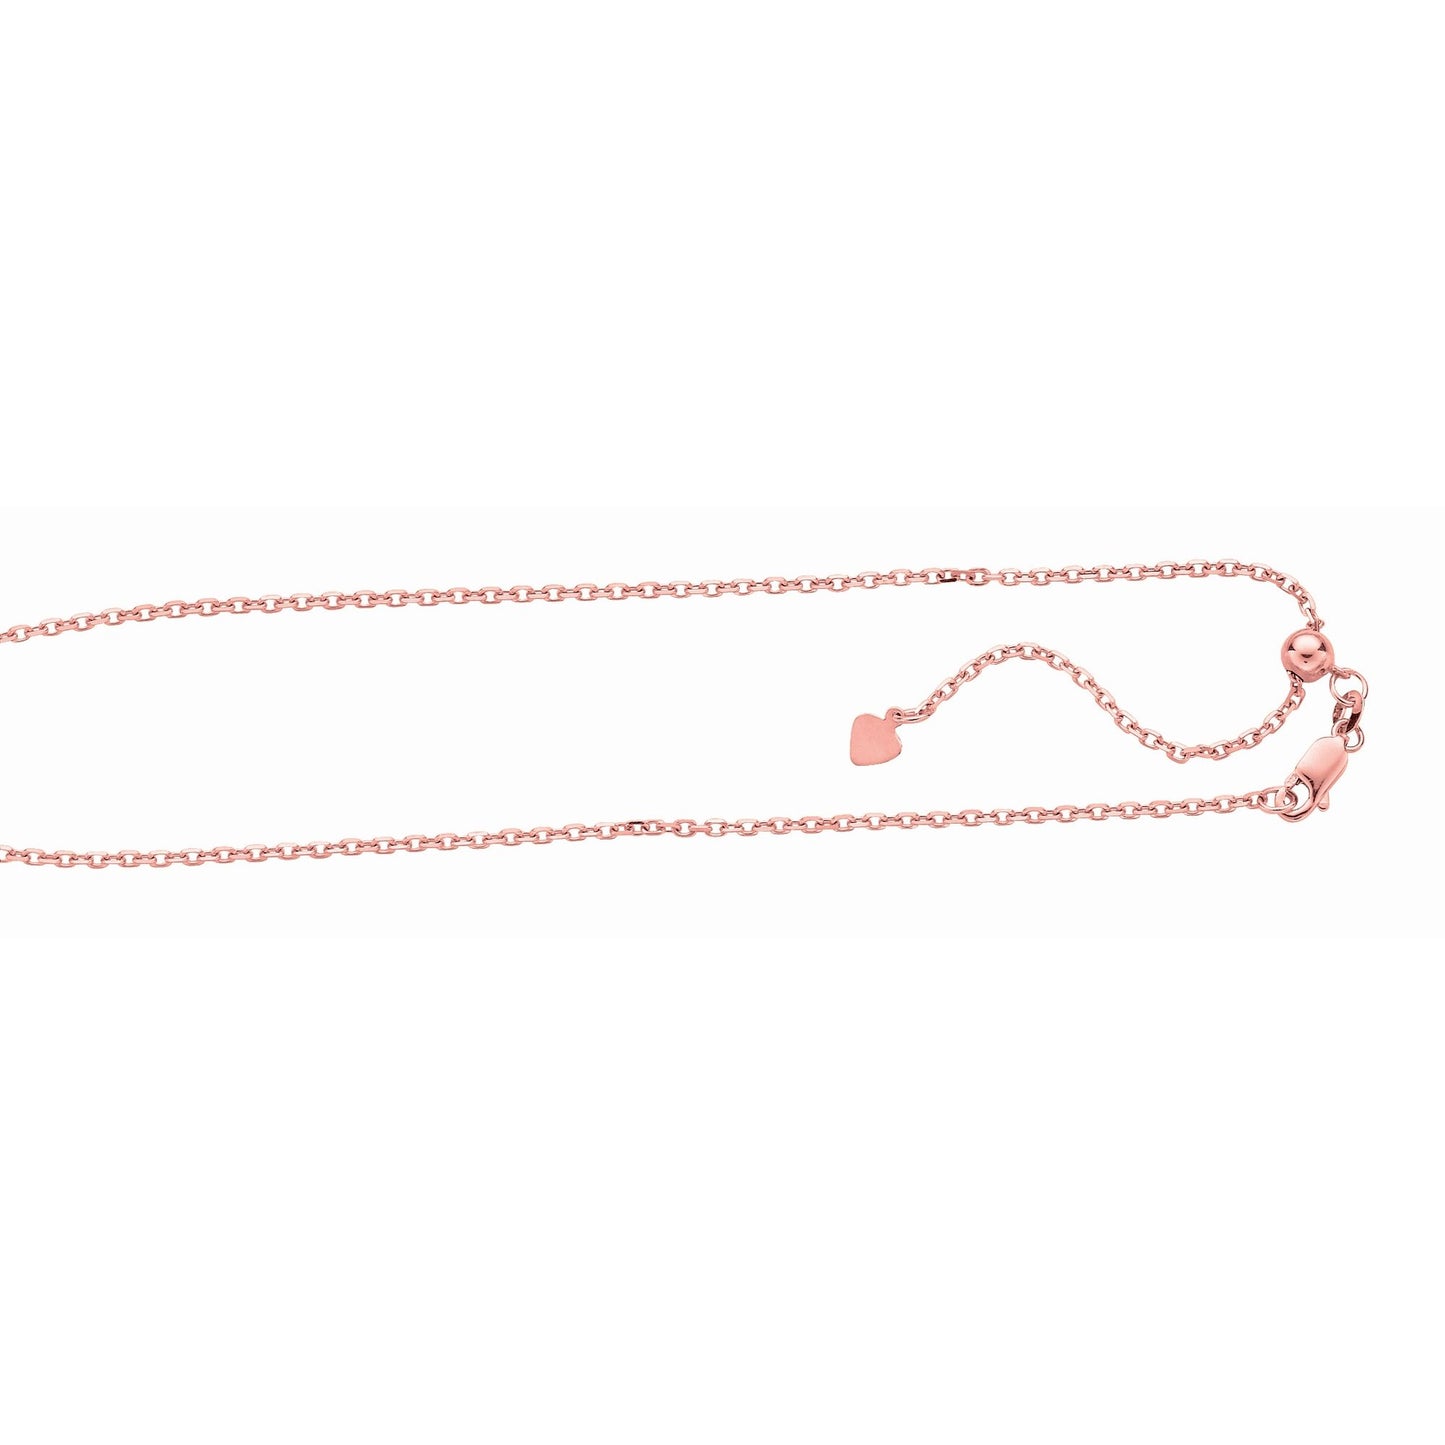 Adjustable Gold Cable Chain Necklace with Lobster Lock